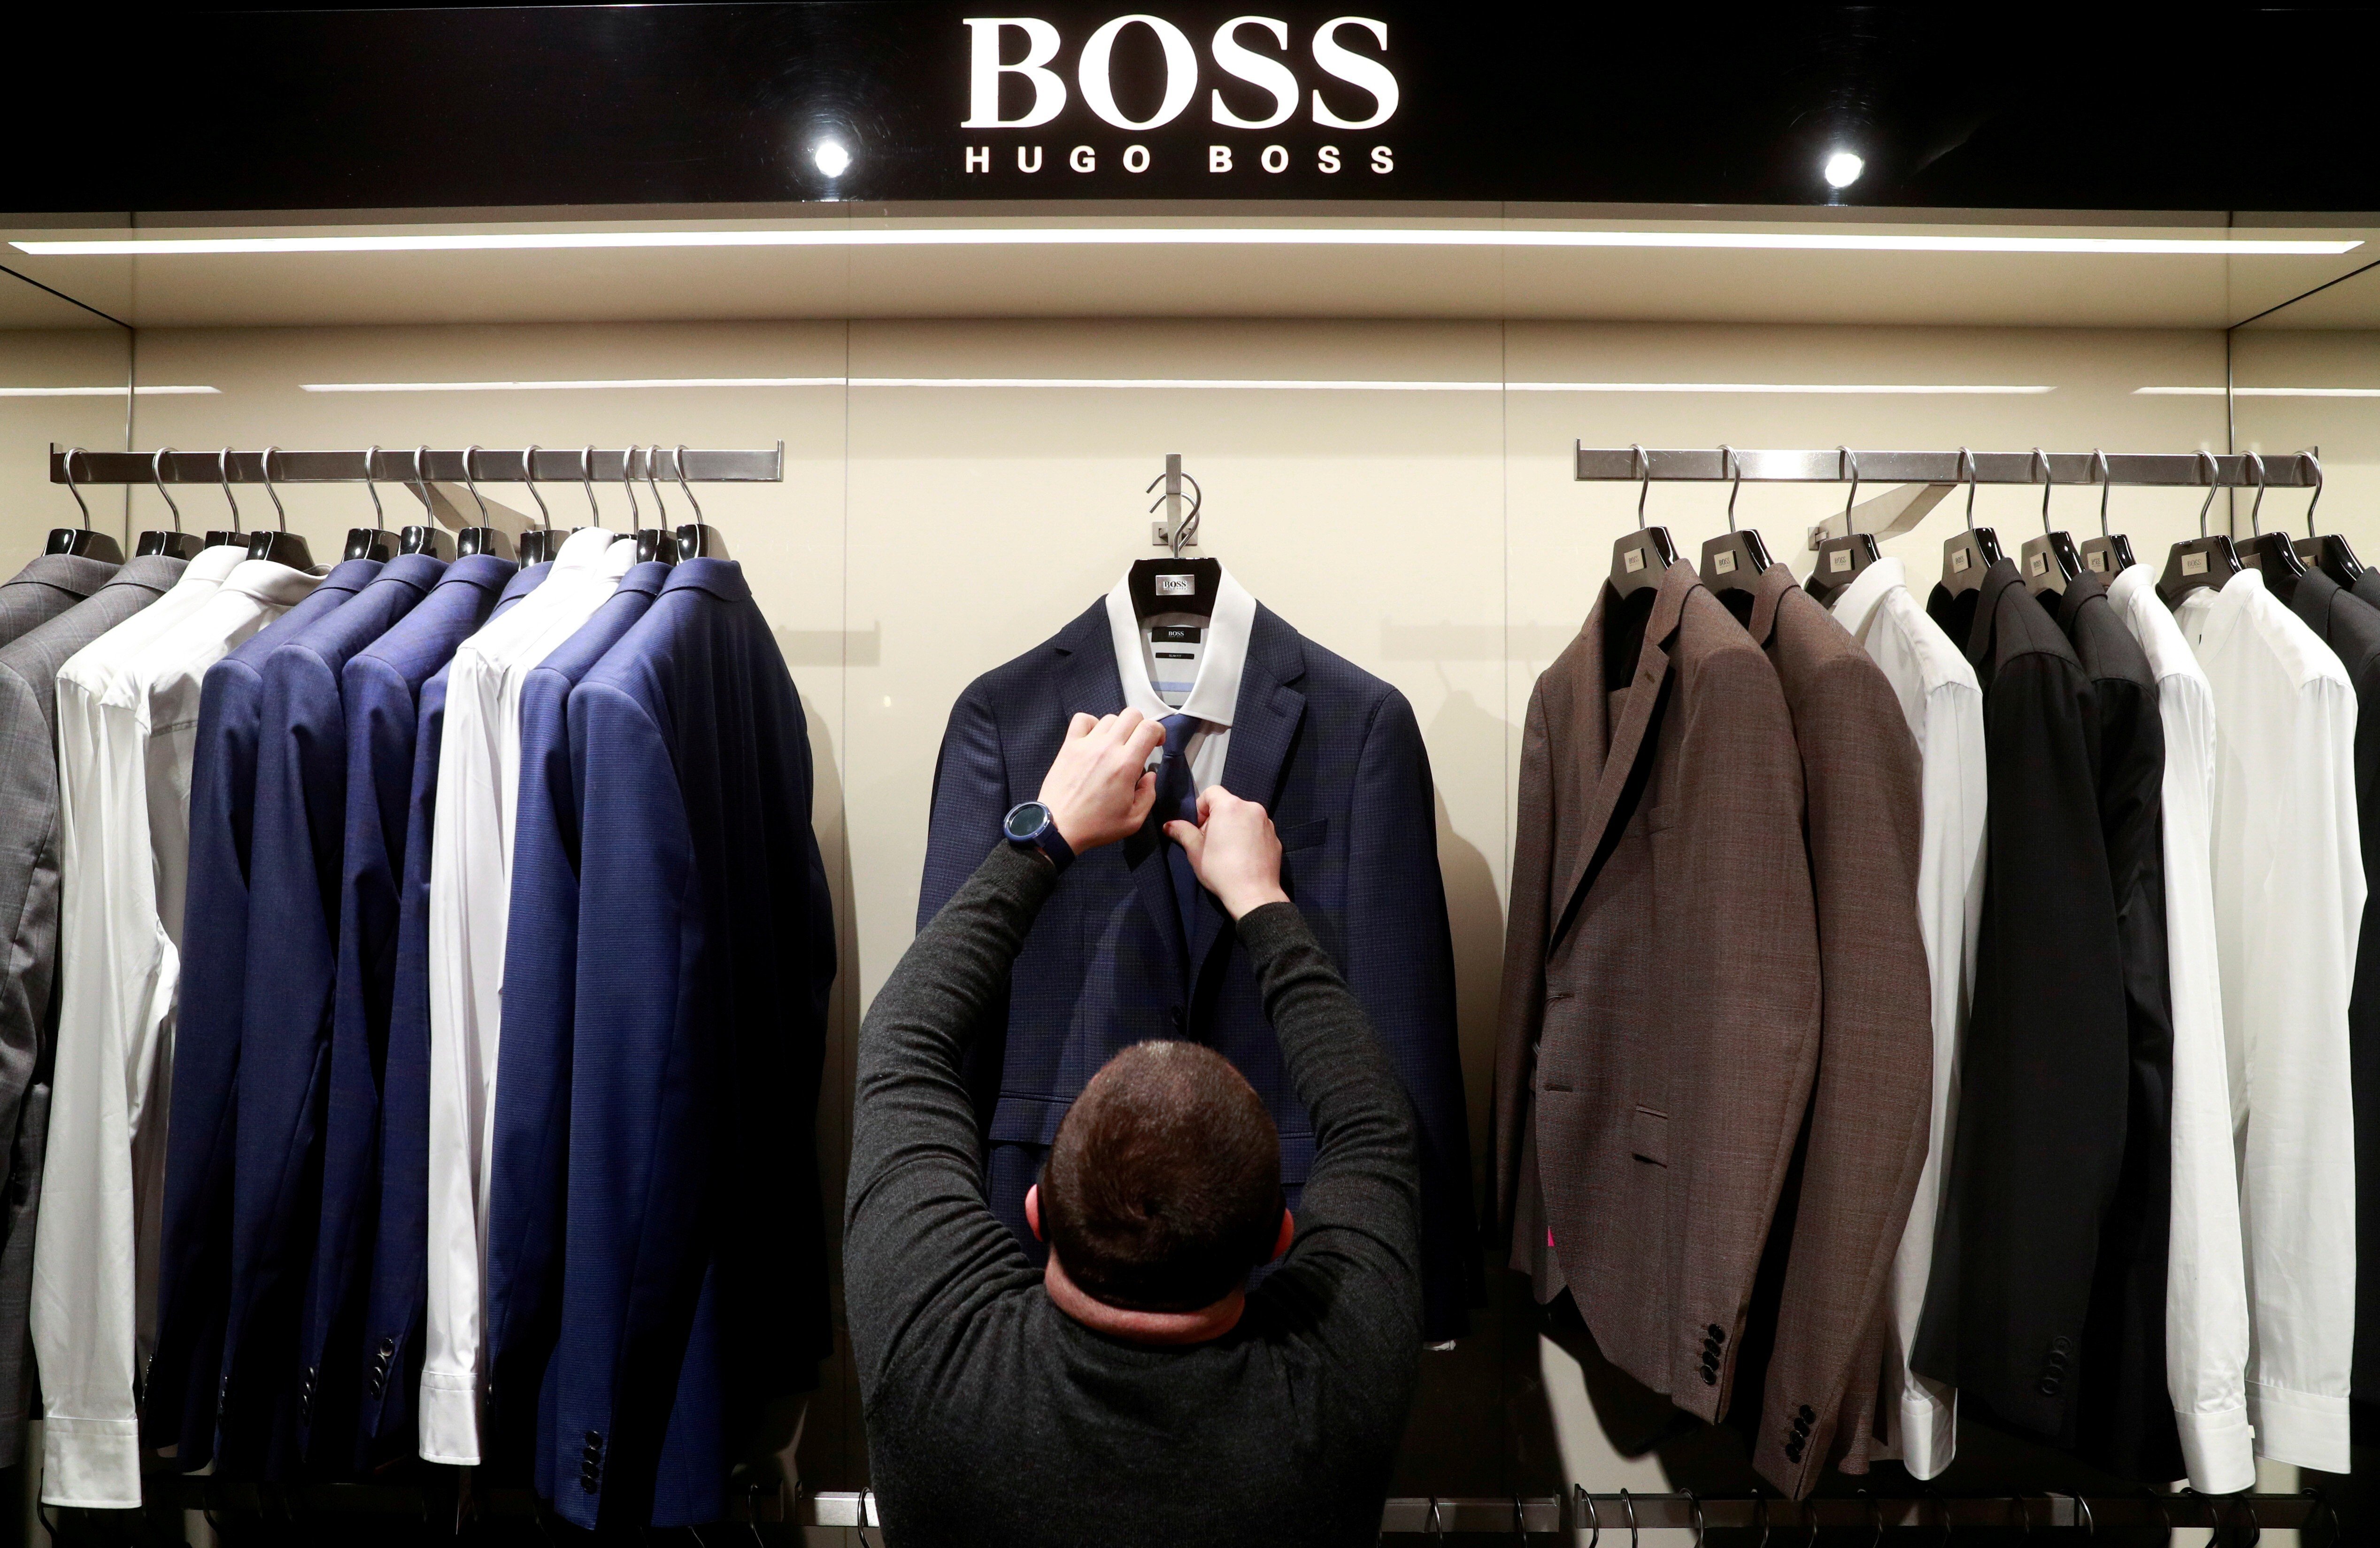 lila Moment Dragende cirkel Xinjiang cotton: Hugo Boss' comments spark accusations of hypocrisy online  | South China Morning Post